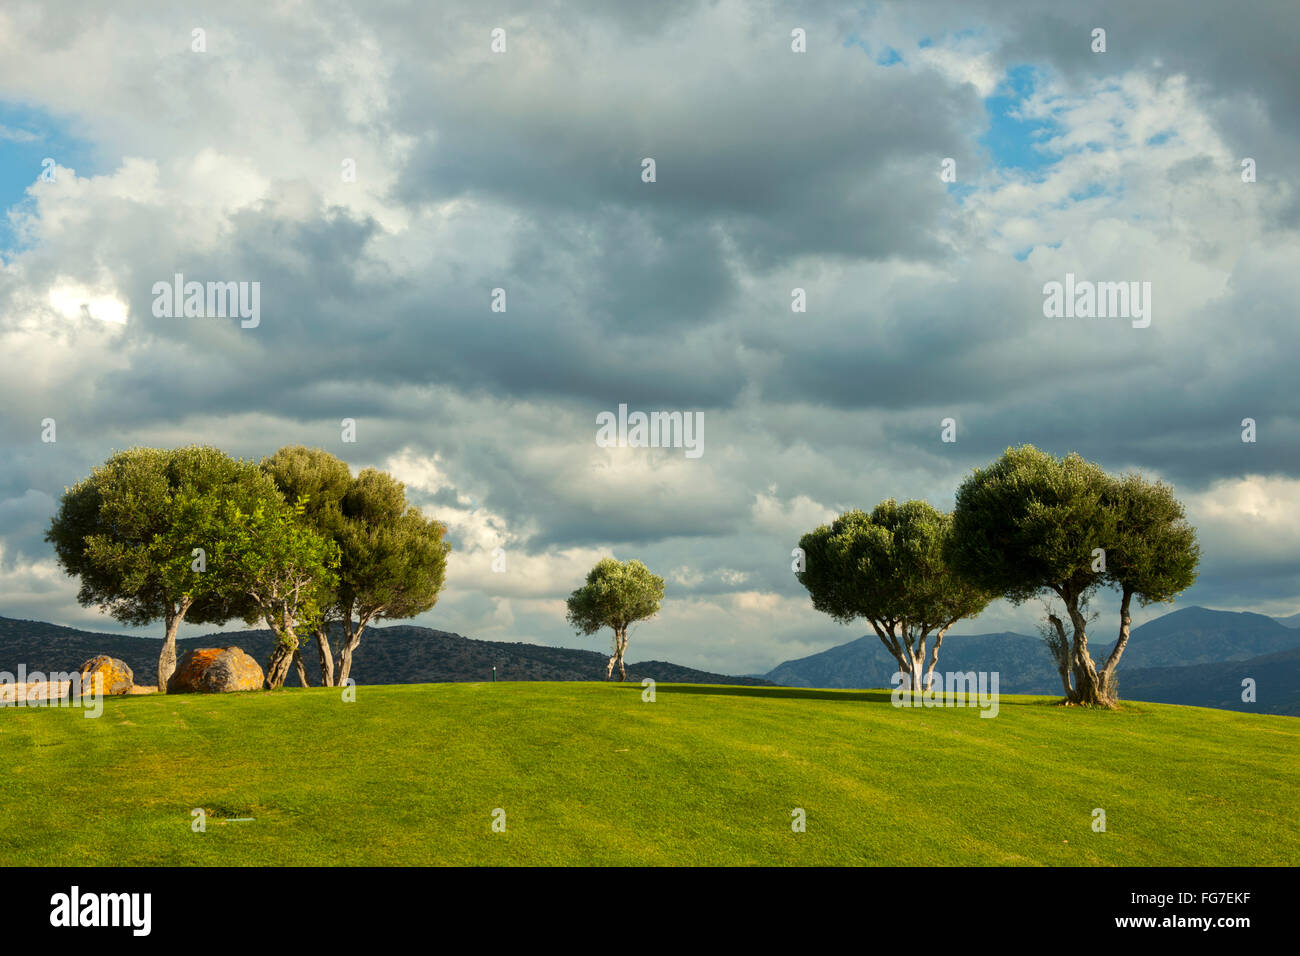 Golf Gr High Resolution Stock Photography and Images - Alamy